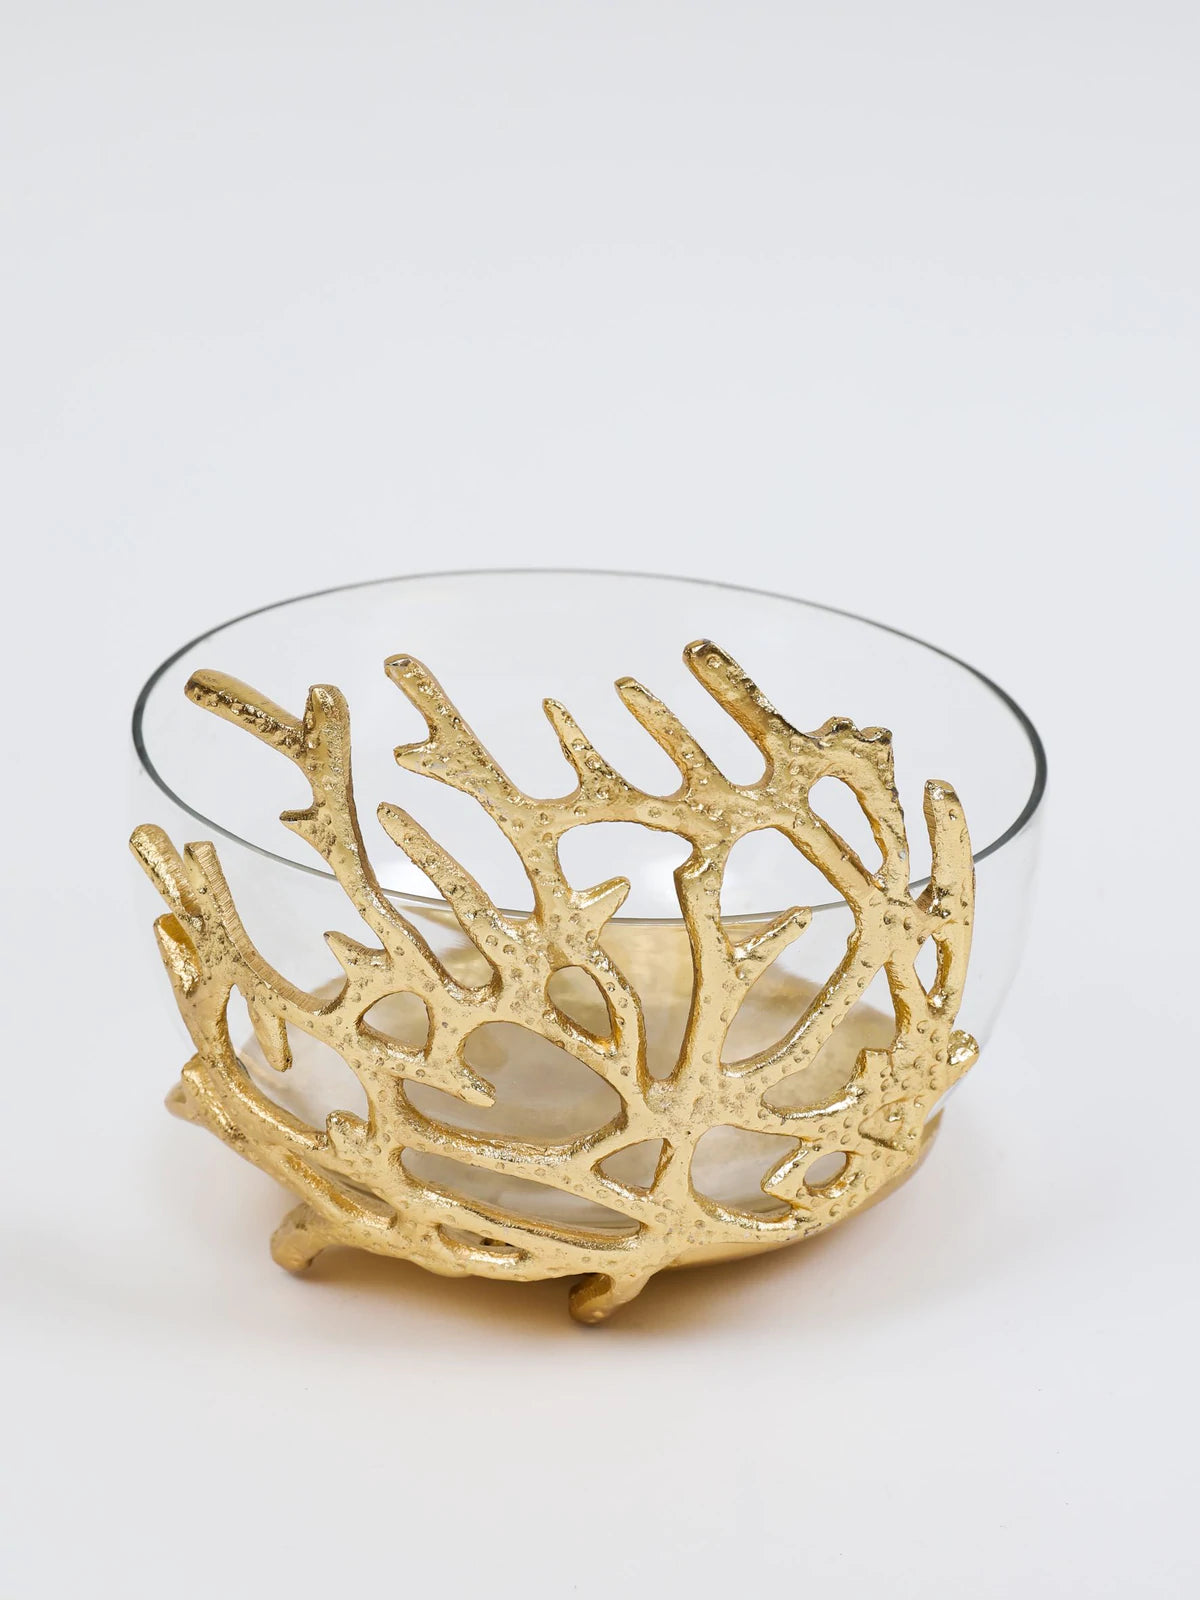 Glass Bowl with Gold Branch Design, Medium Size.